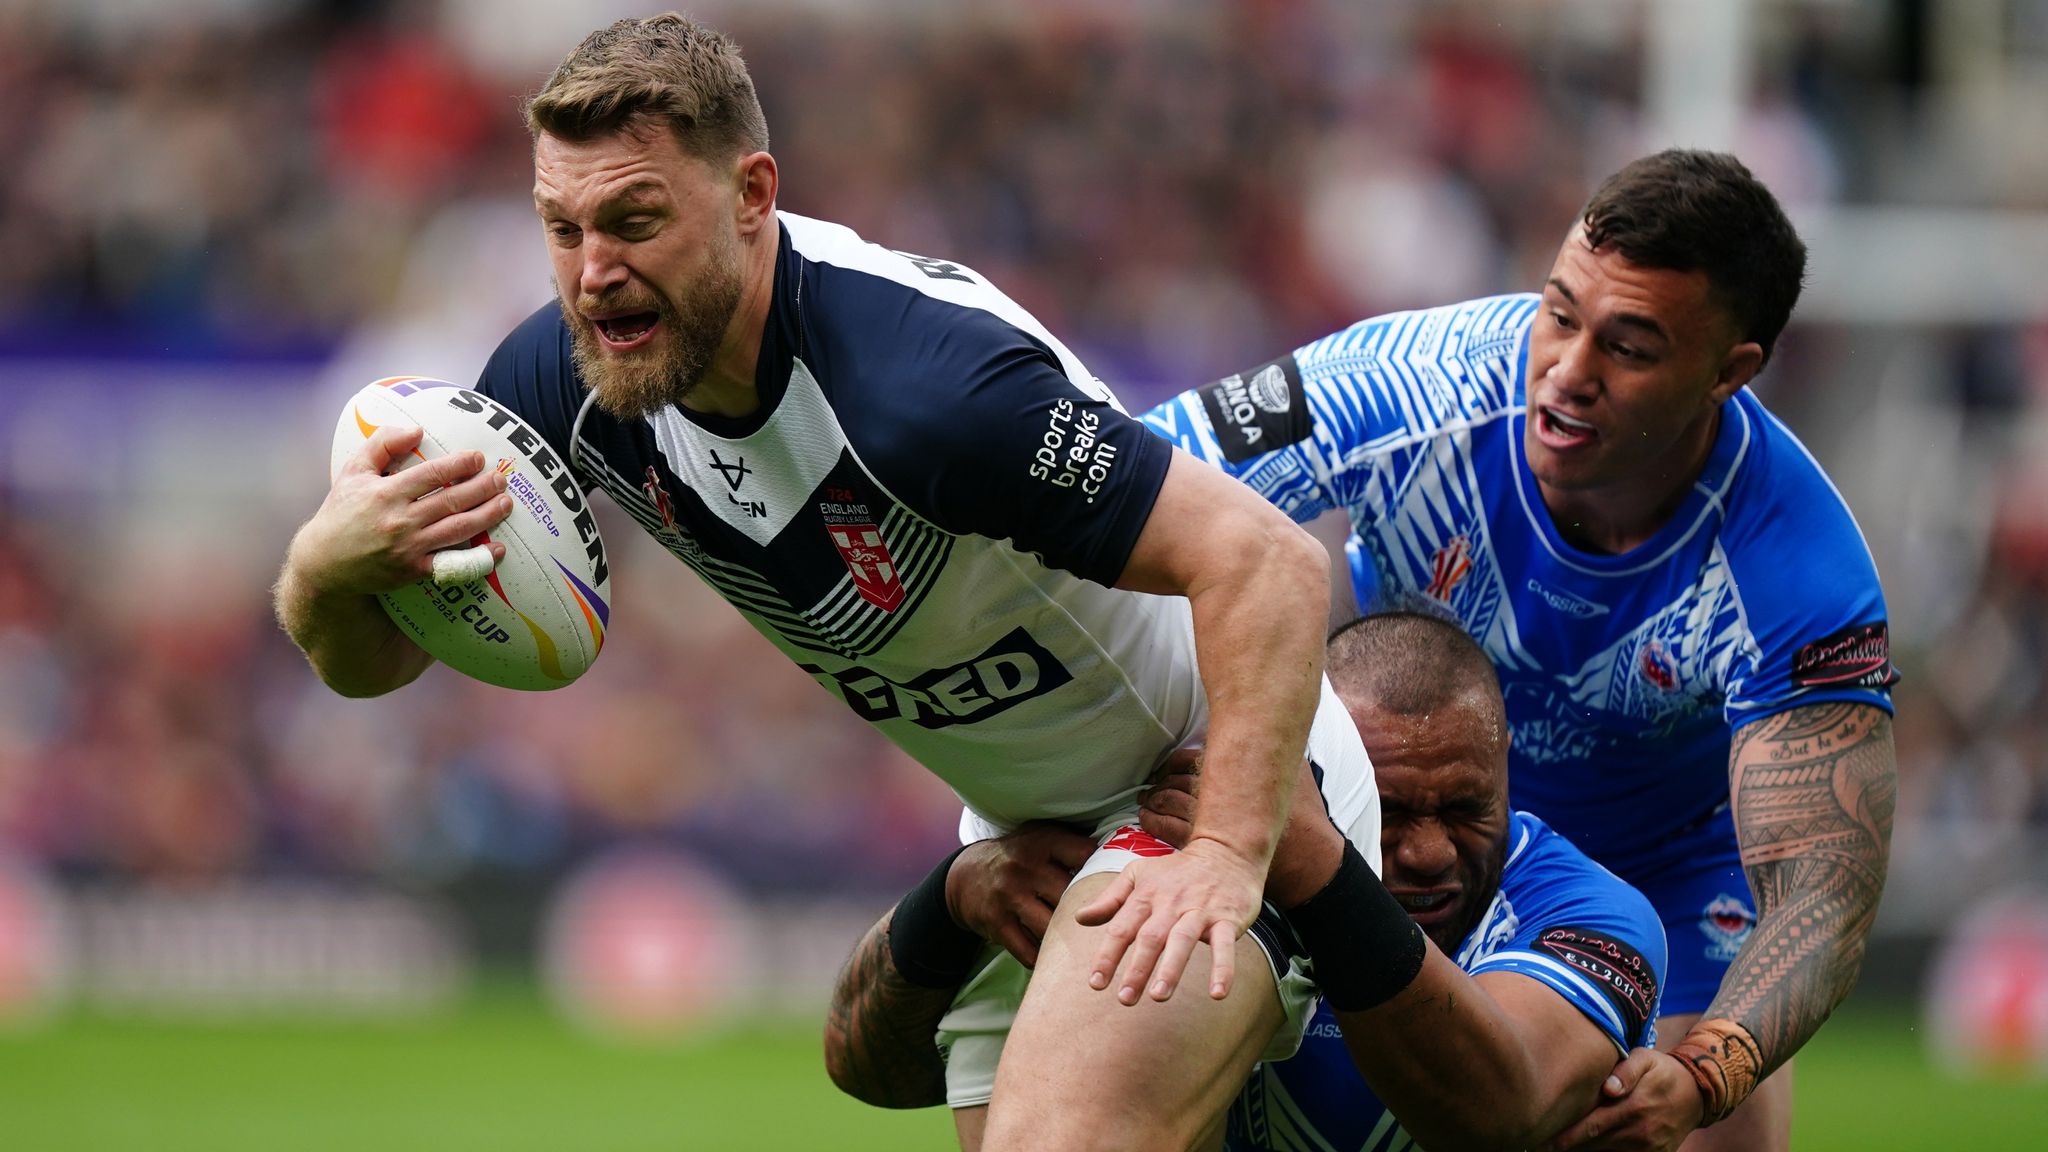 Rugby League World Cup 2021 England vs Samoa at Newcastles St James Park recap Rugby League News Sky Sports